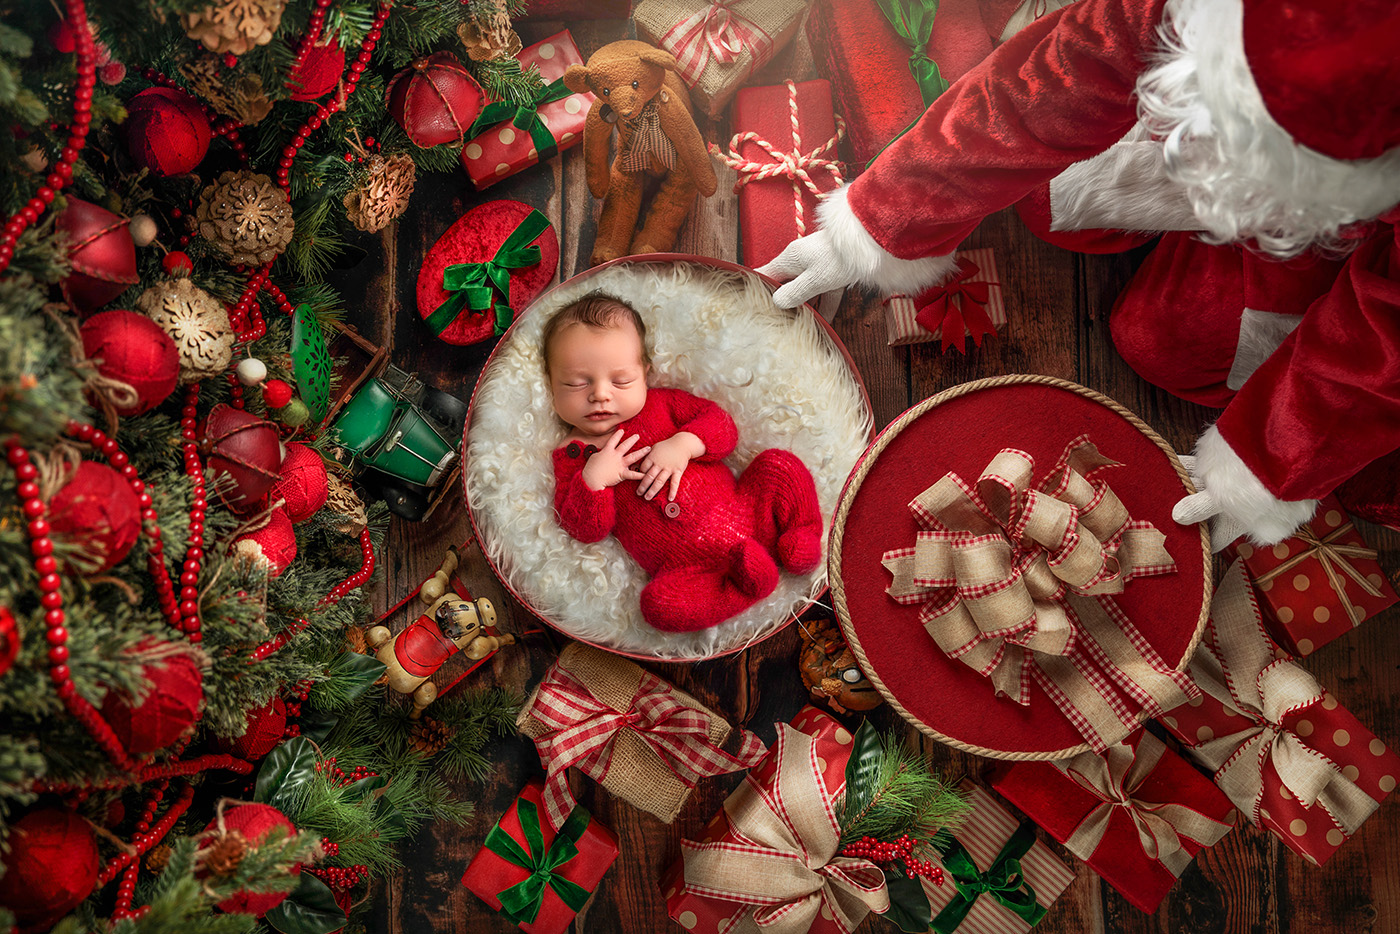 a whimsical scene of Santa leaving baby Joseph as a present under the Christmas tree